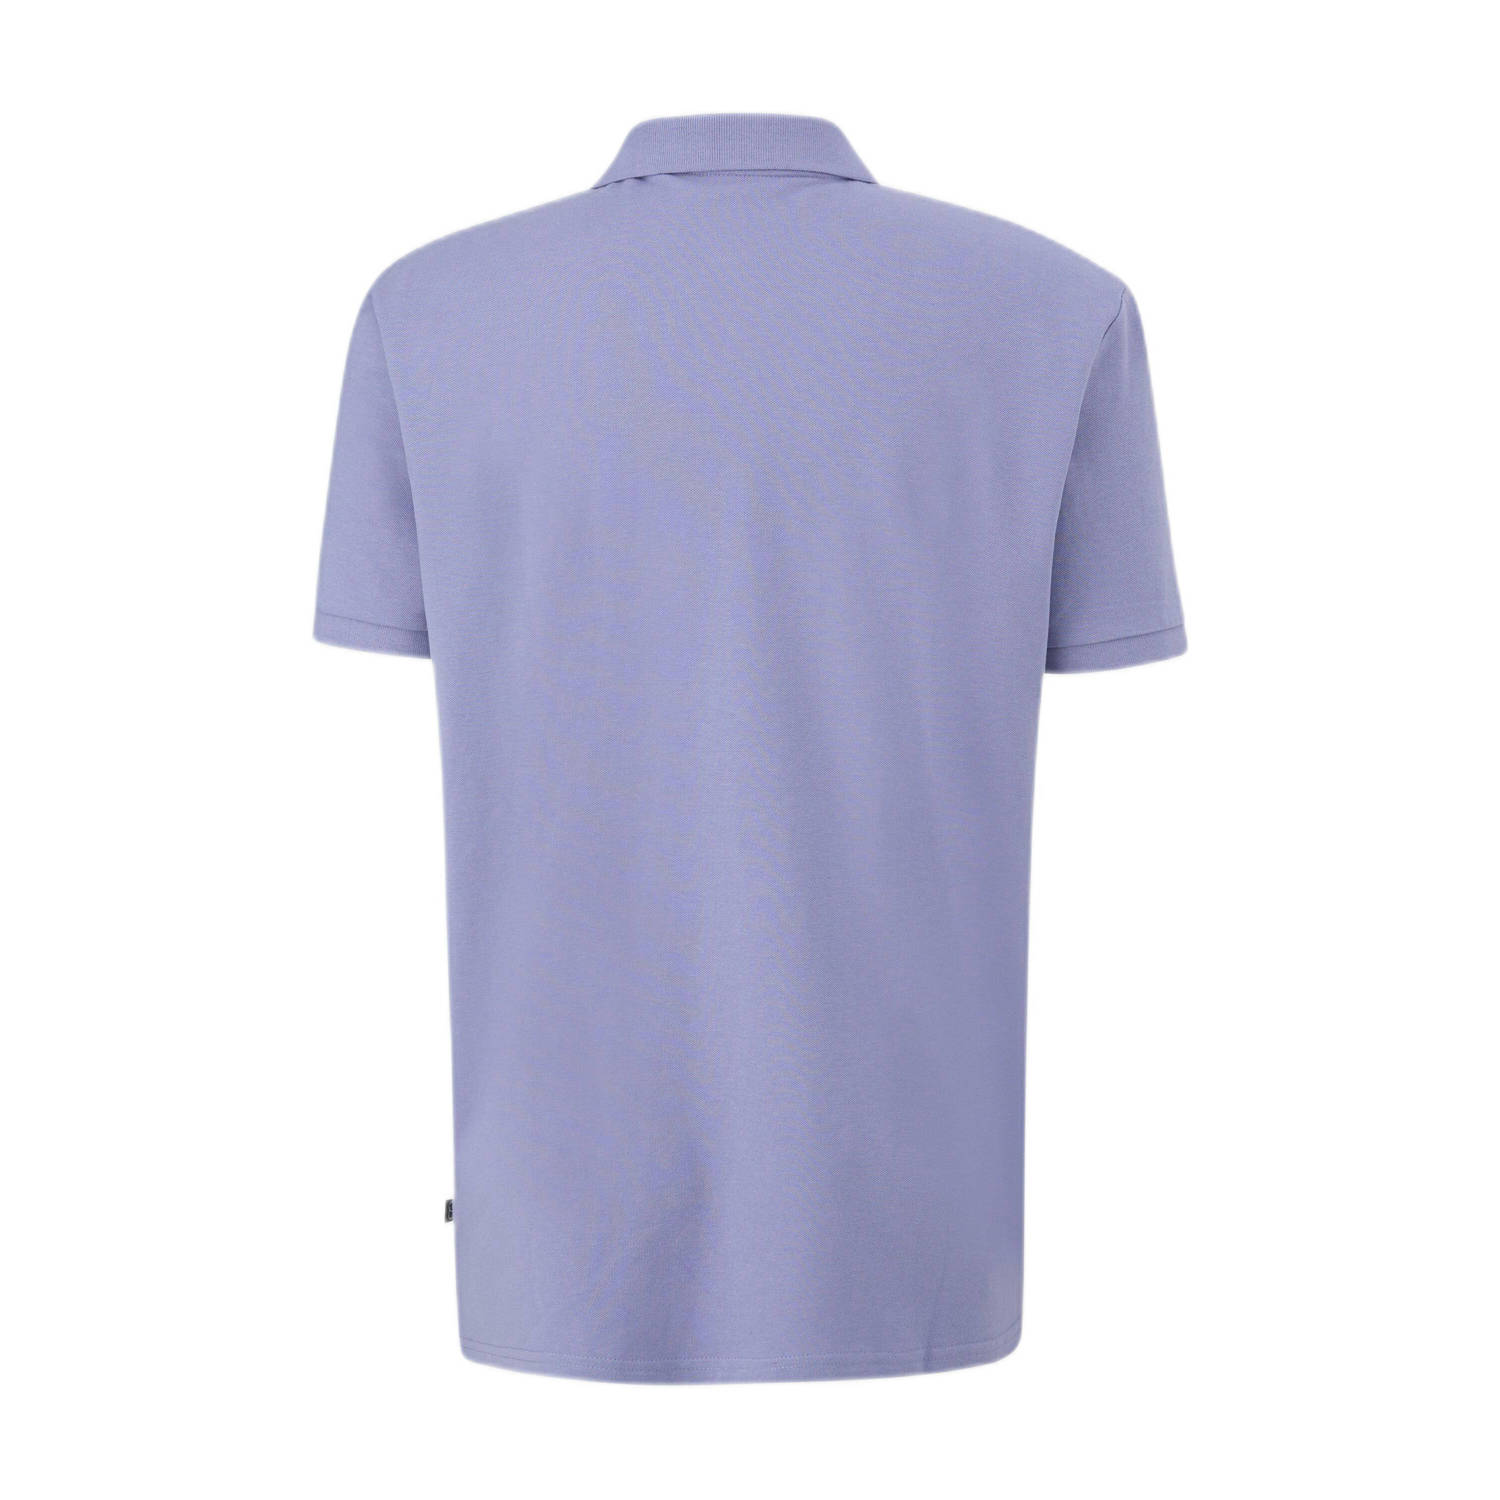 Q S by s.Oliver regular fit polo violet